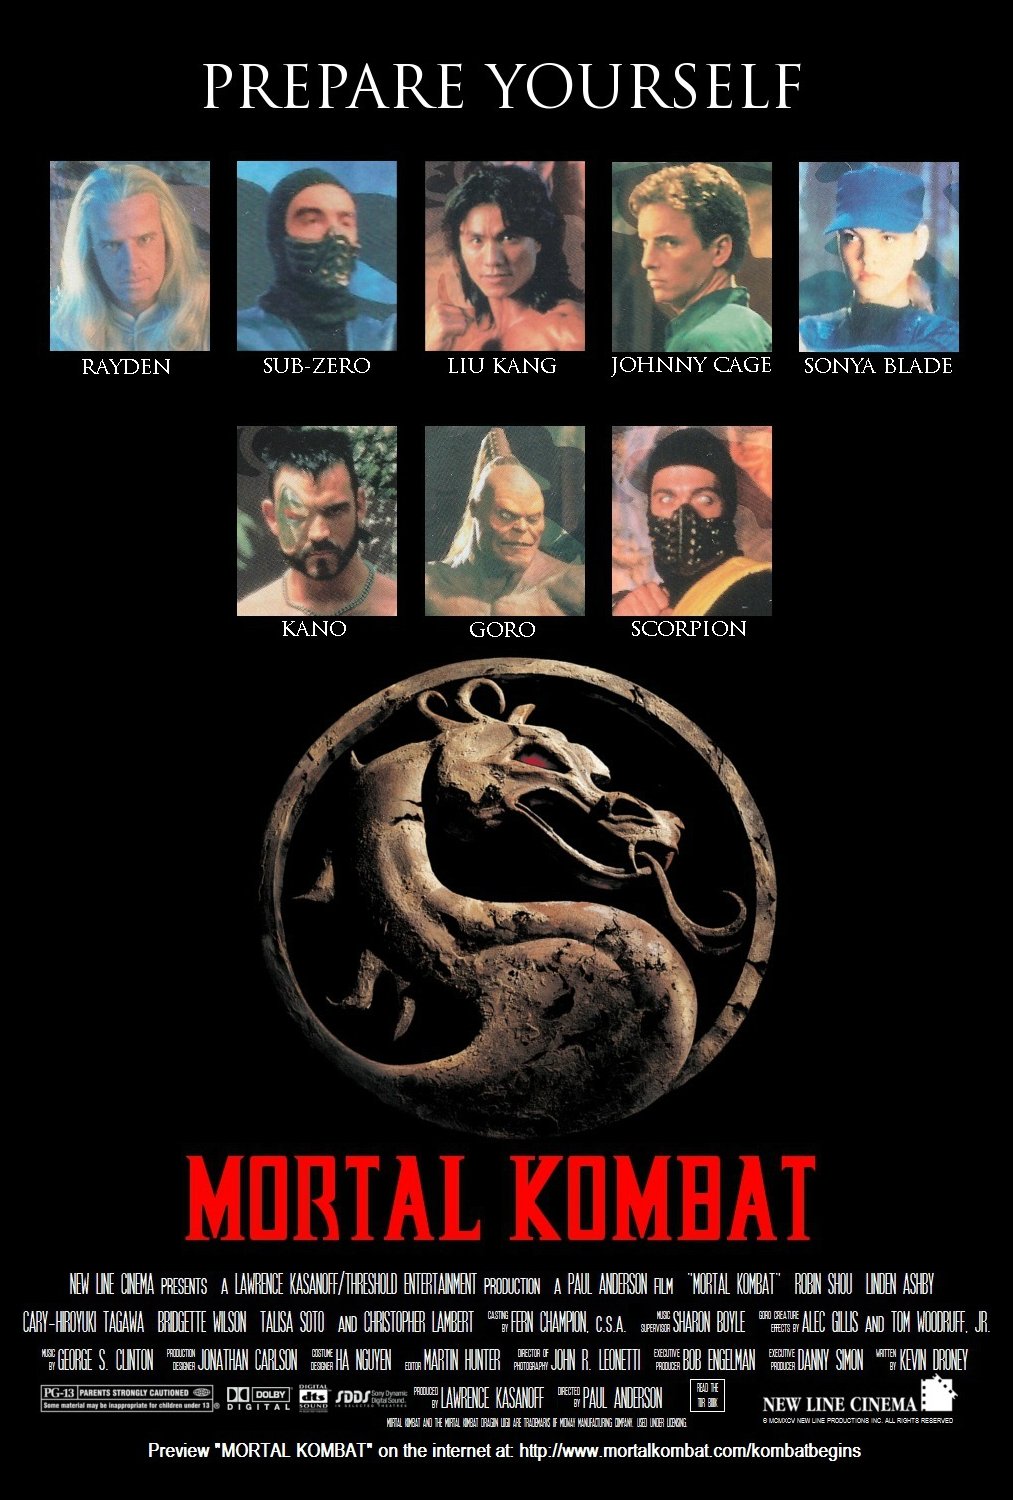 ✦💫𝐹𝑢𝑡𝑢𝑟𝑒𝐵𝑜𝑦𝑊𝒉𝑜 😎✦ on X: Mortal Kombat 95 Kano Actor's Son  Posts A Thank You To All The MK Community For His Dads Role & Praise We've  Given Him #MortalKombat #MortalKombat1995 #MK95 if